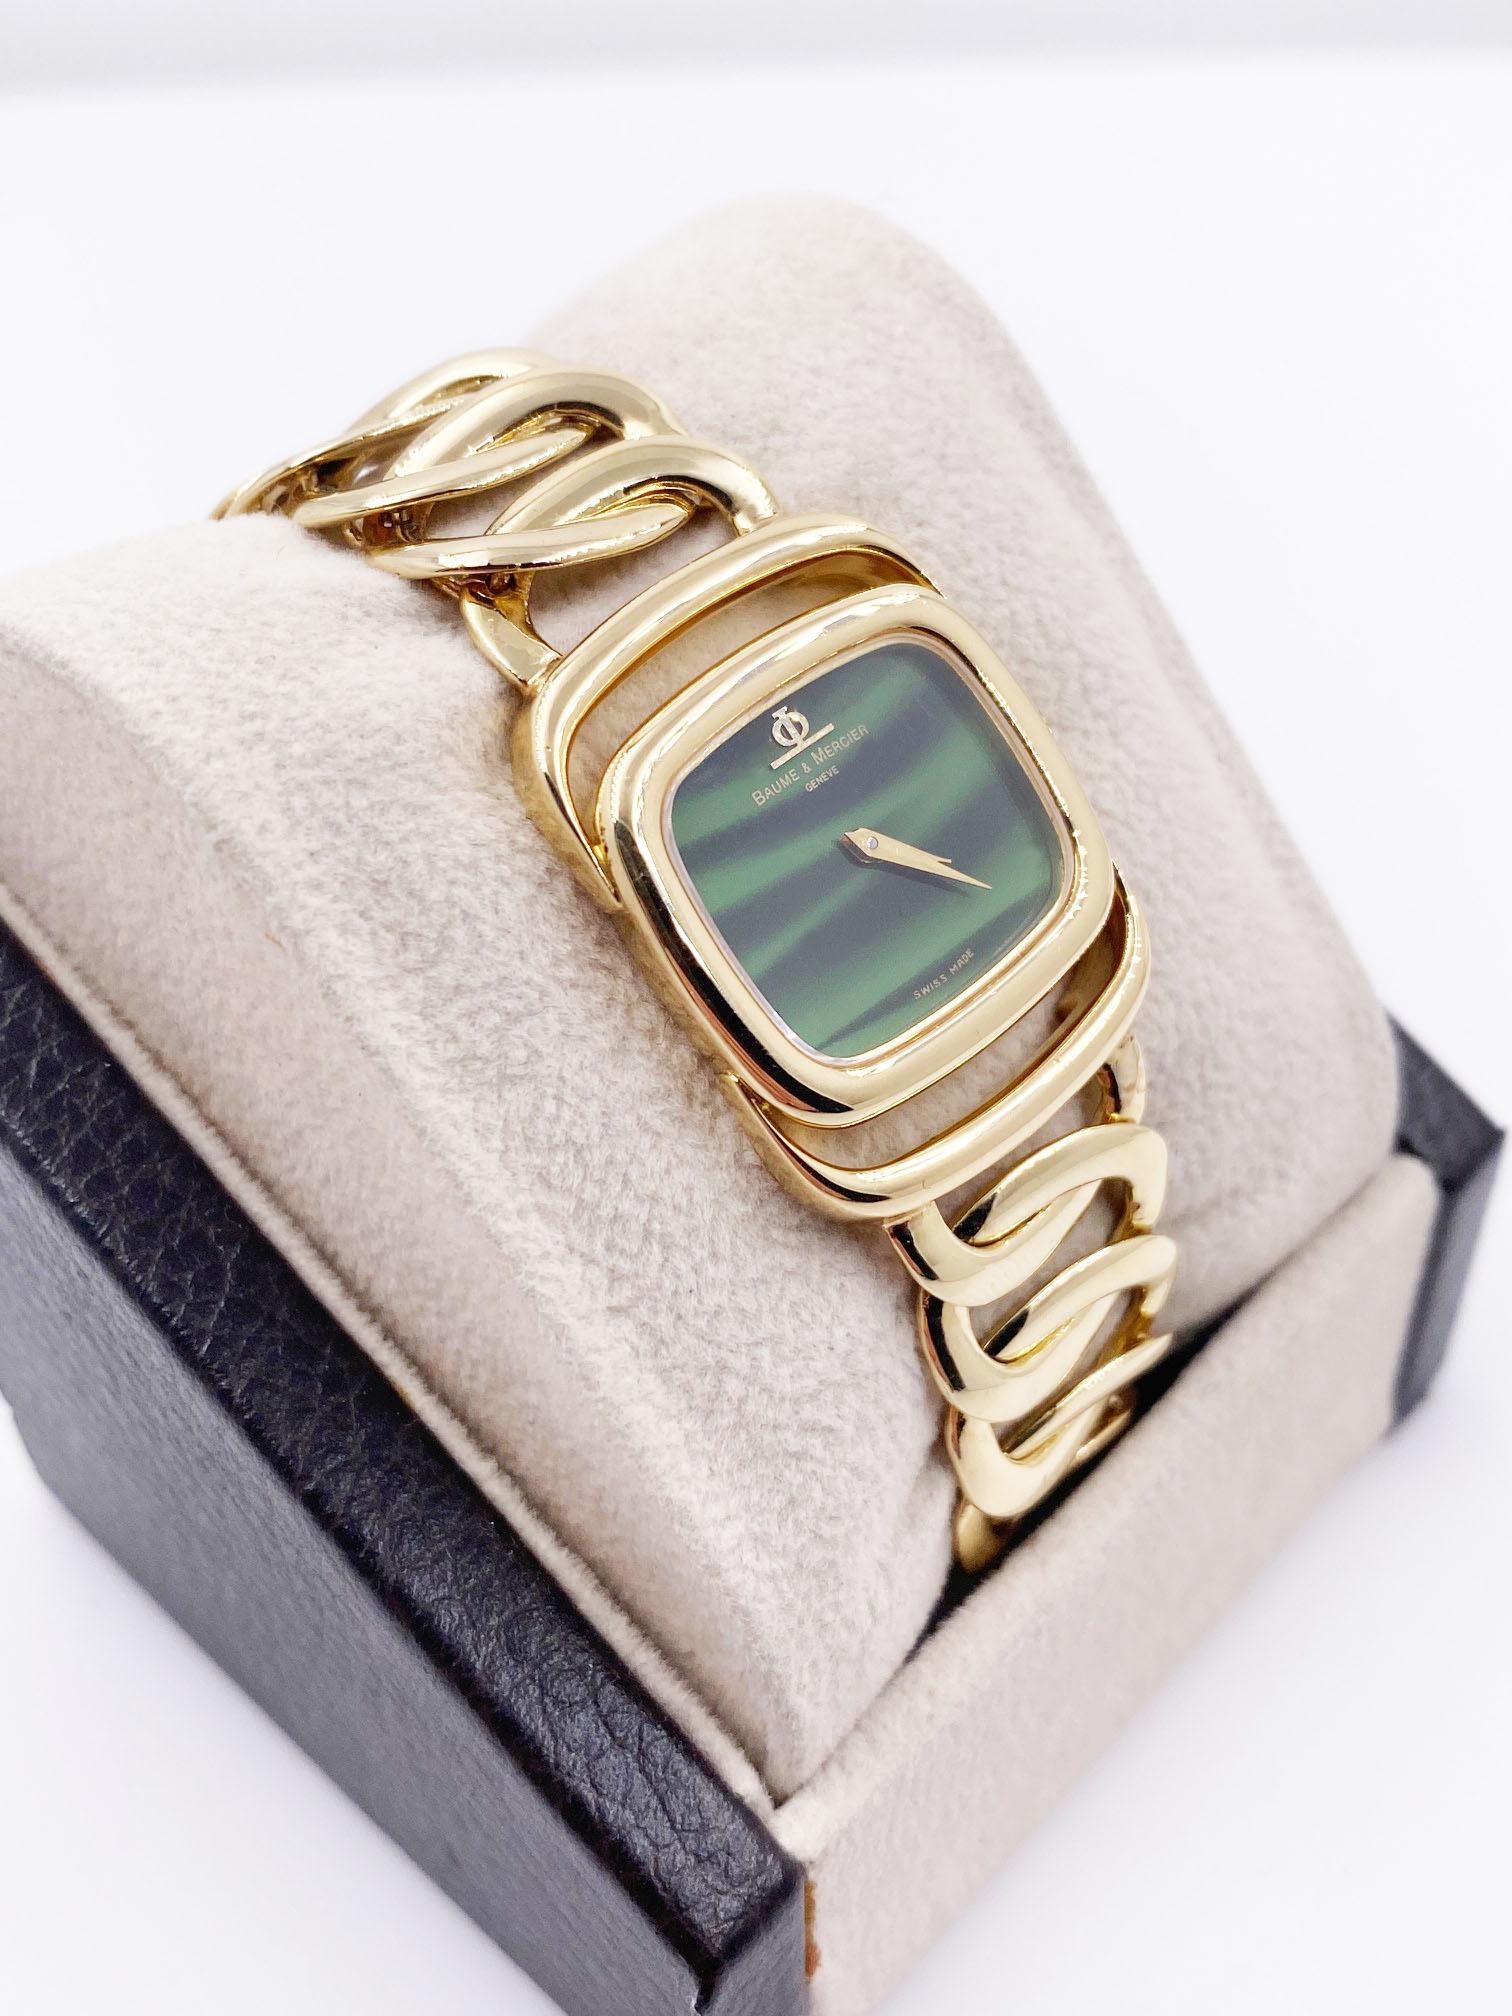 Reference Number: 38305



Year: Estimated from the 1960's 

 

Case Material: 18K Yellow Gold

 

Band: 18K Yellow Gold

 

Bezel:  18K Yellow Gold

 

Dial: Original Green Malachite Dial

 

Face: Sapphire Crystal

 

Case Size: Approximately